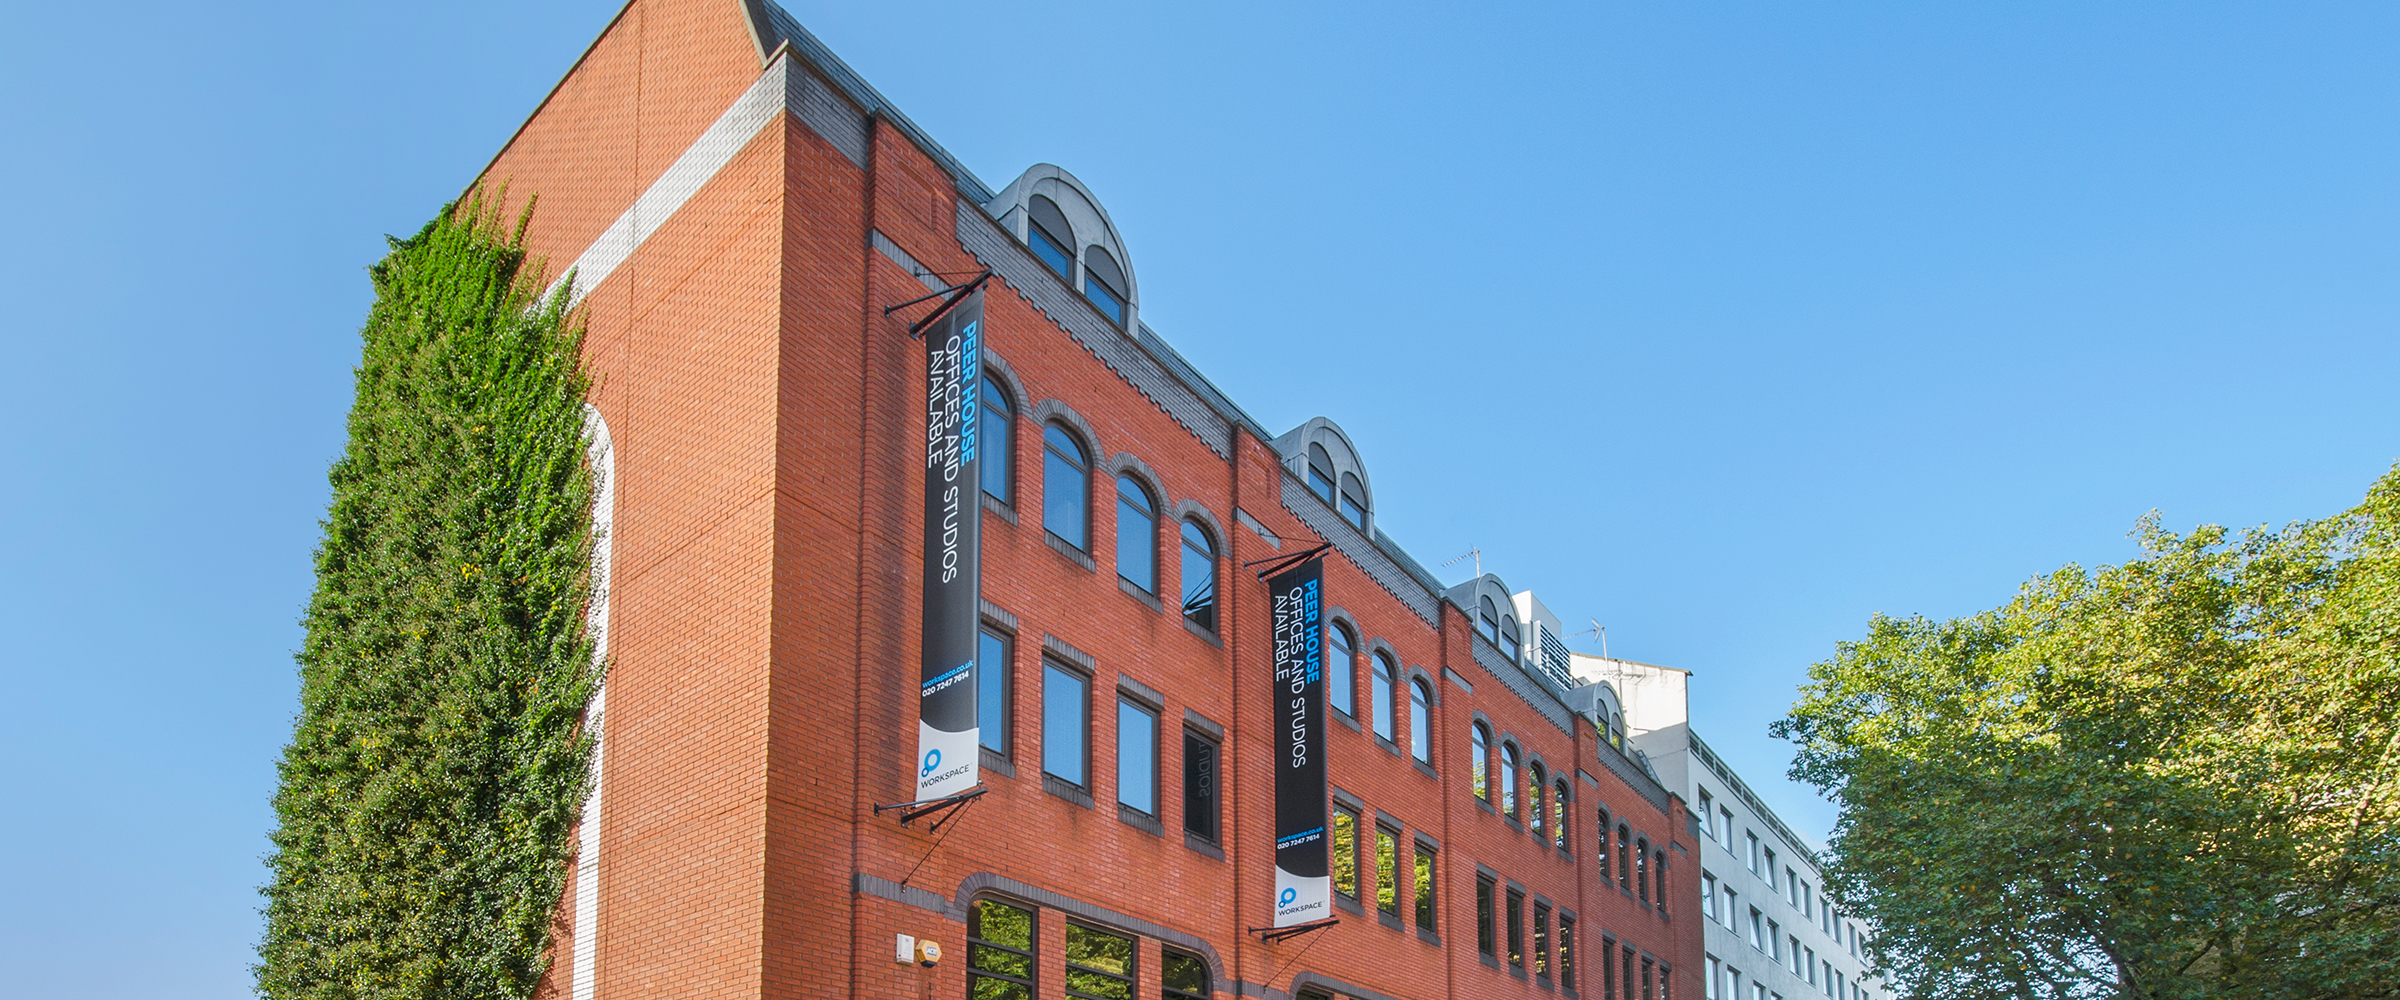 Peer House Building, offices to rent Chancery Lane Workspace® | Peer House London 020 3813 2621